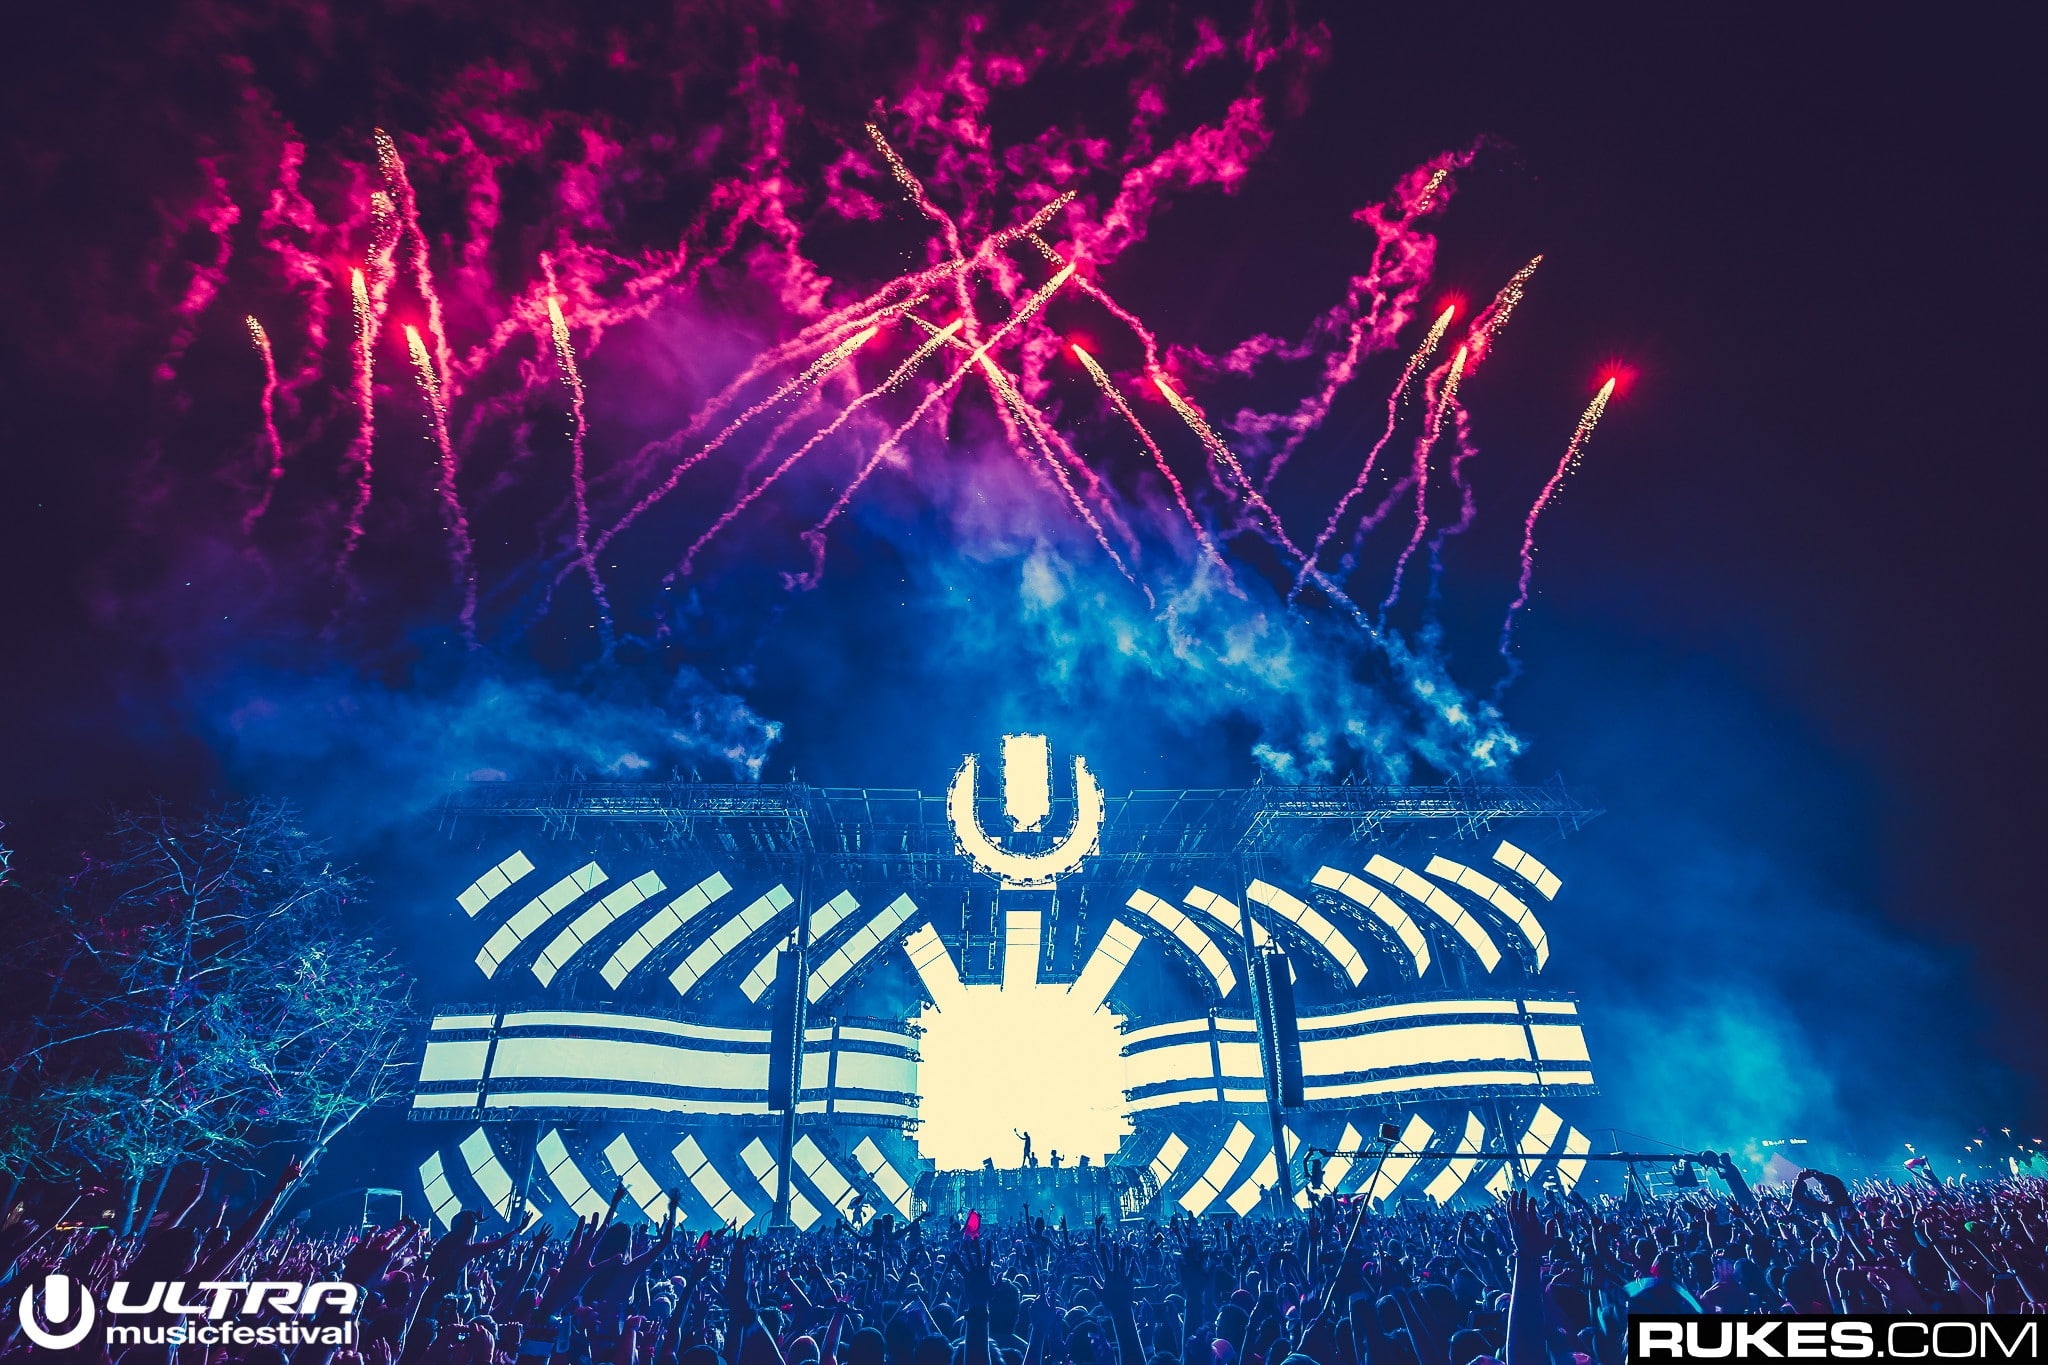 Ultra Music Festival, Rukes, stages, lights, photography, fireworks